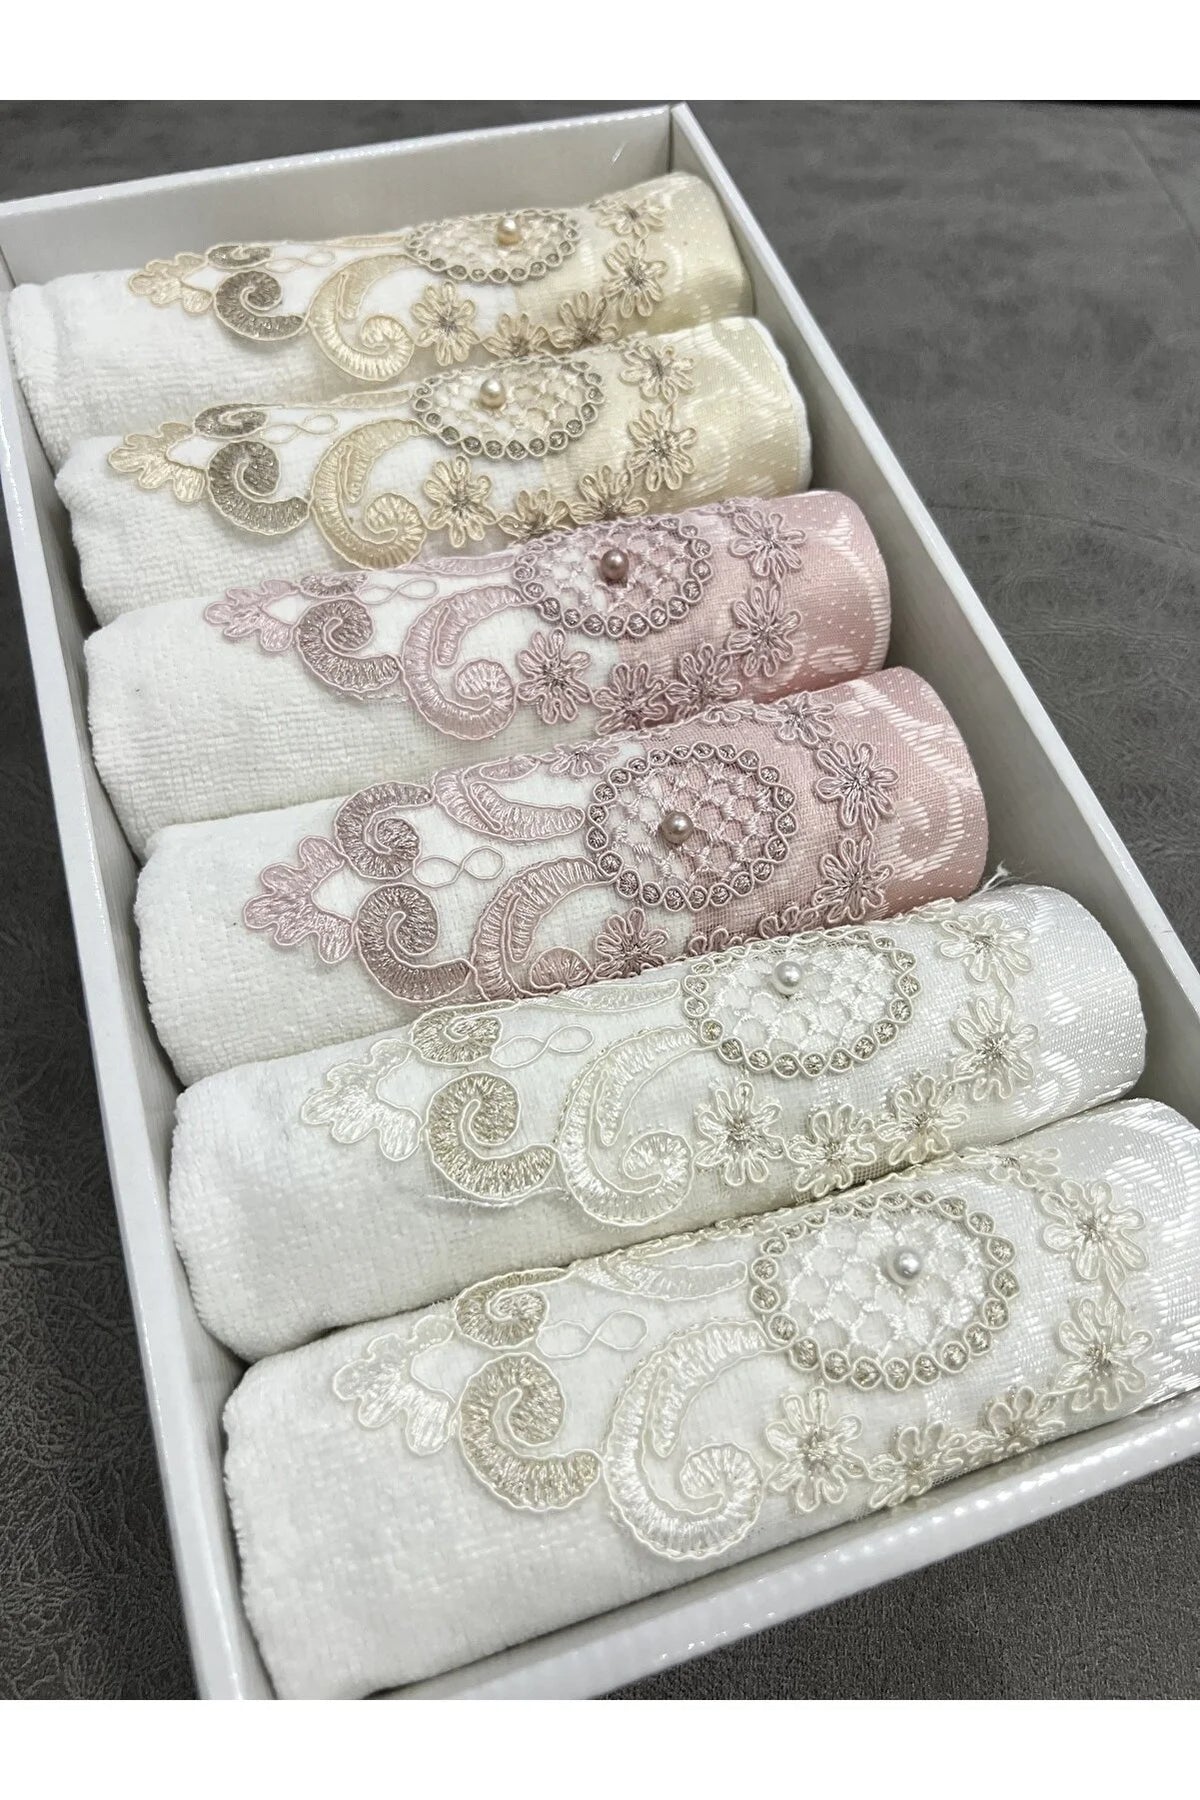 Ayhan Home Kitchen Set of 6 Laced Satin Embroidered Boxed Dowry 30x50 Towels